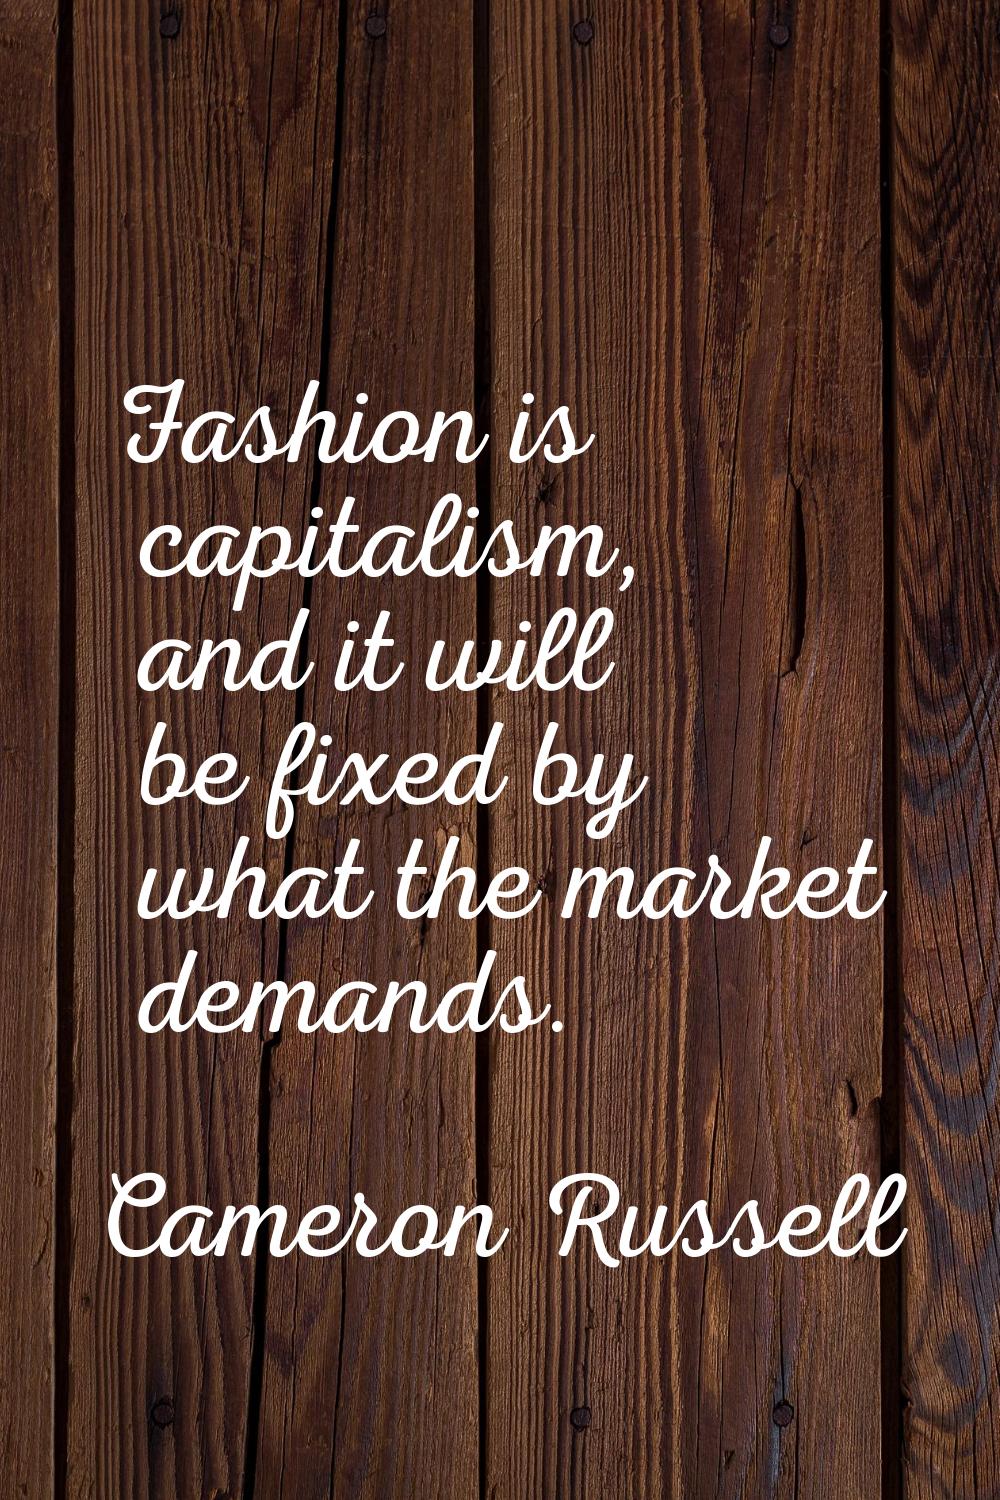 Fashion is capitalism, and it will be fixed by what the market demands.